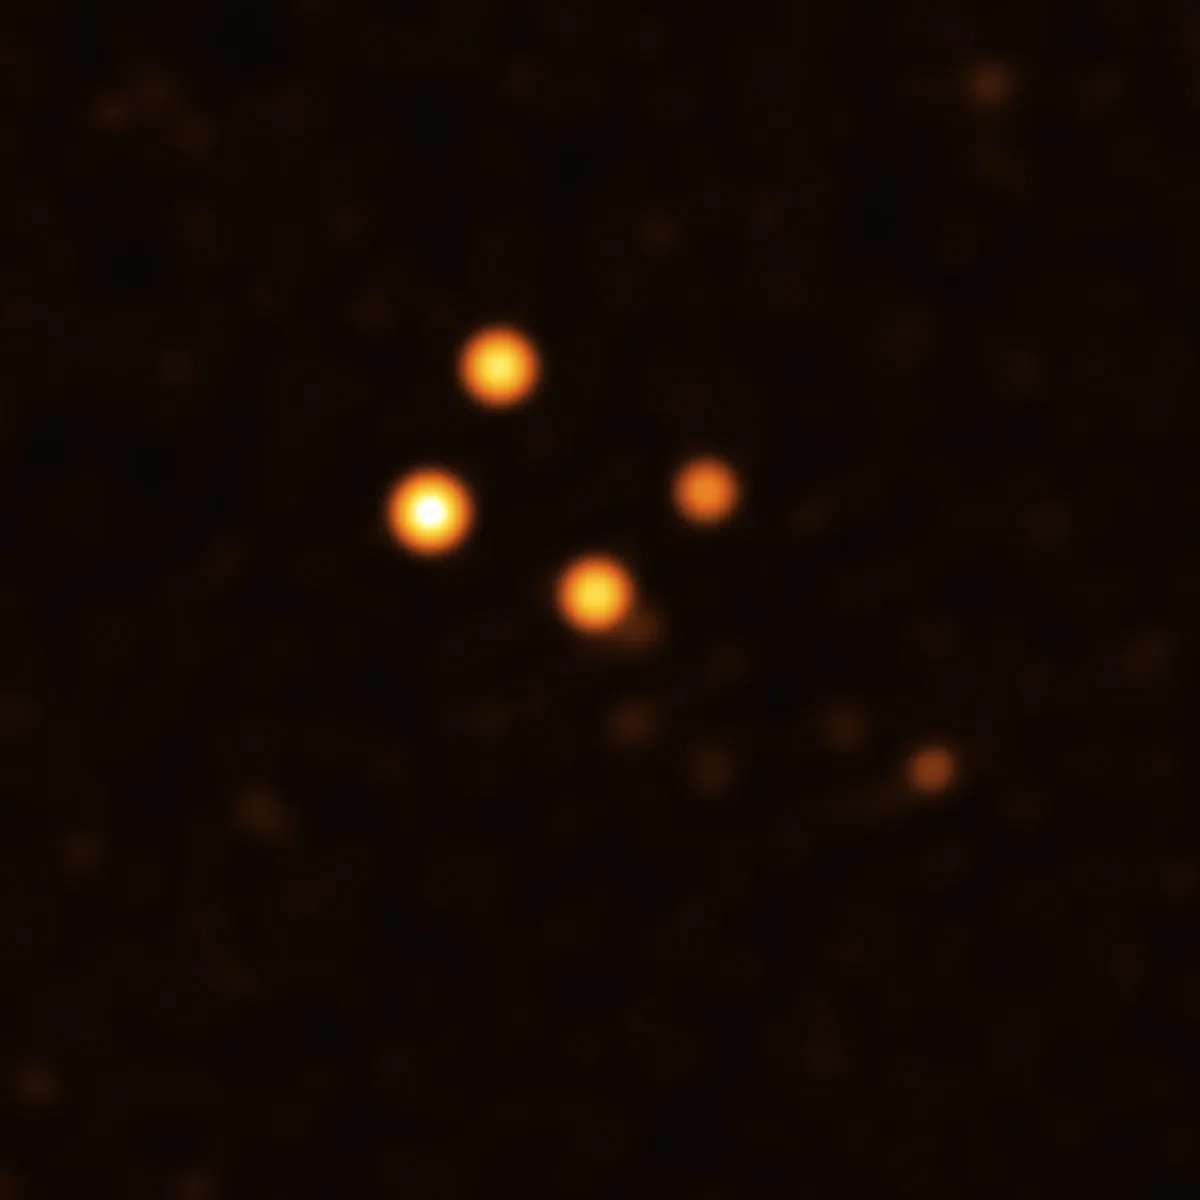 This image show stars orbiting very close to Sgr A* (centre), the supermassive black hole at the heart of the Milky Way. They were obtained with the GRAVITY instrument on ESO’s Very Large Telescope Interferometer (VLTI) at the end of July 2021.